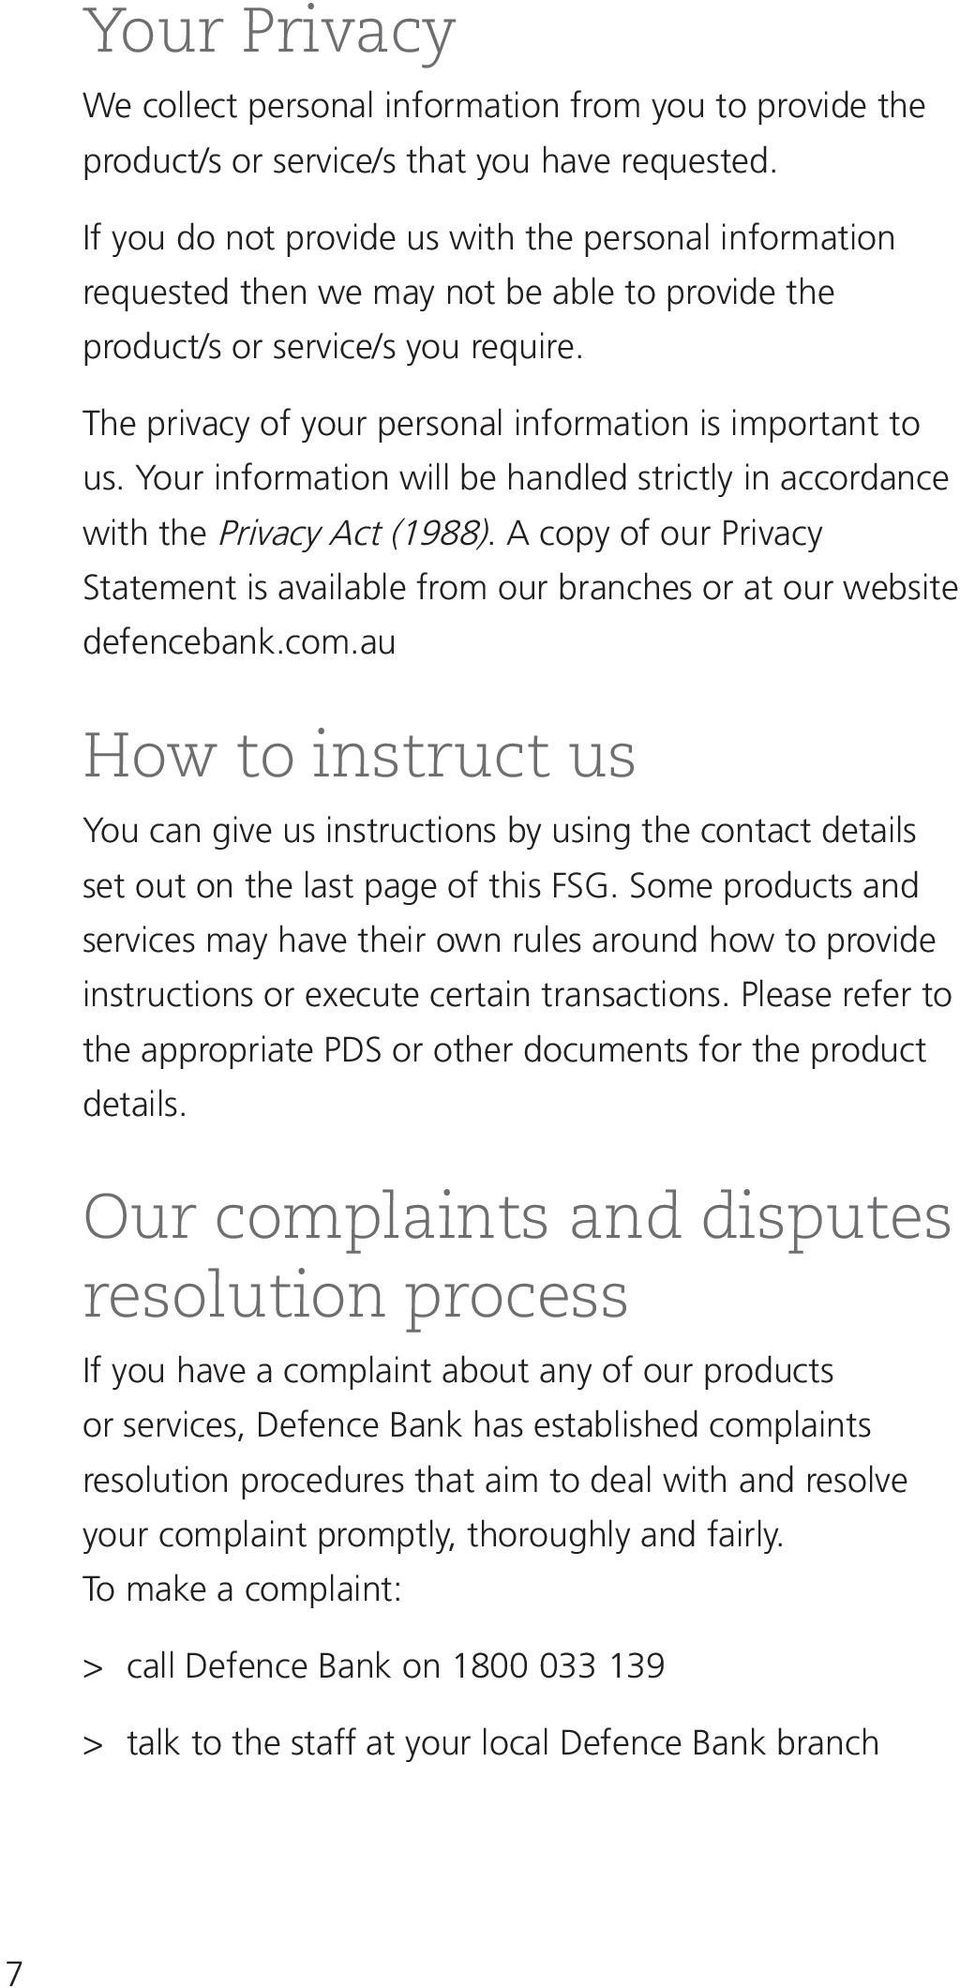 Your information will be handled strictly in accordance with the Privacy Act (1988). A copy of our Privacy Statement is available from our branches or at our website defencebank.com.